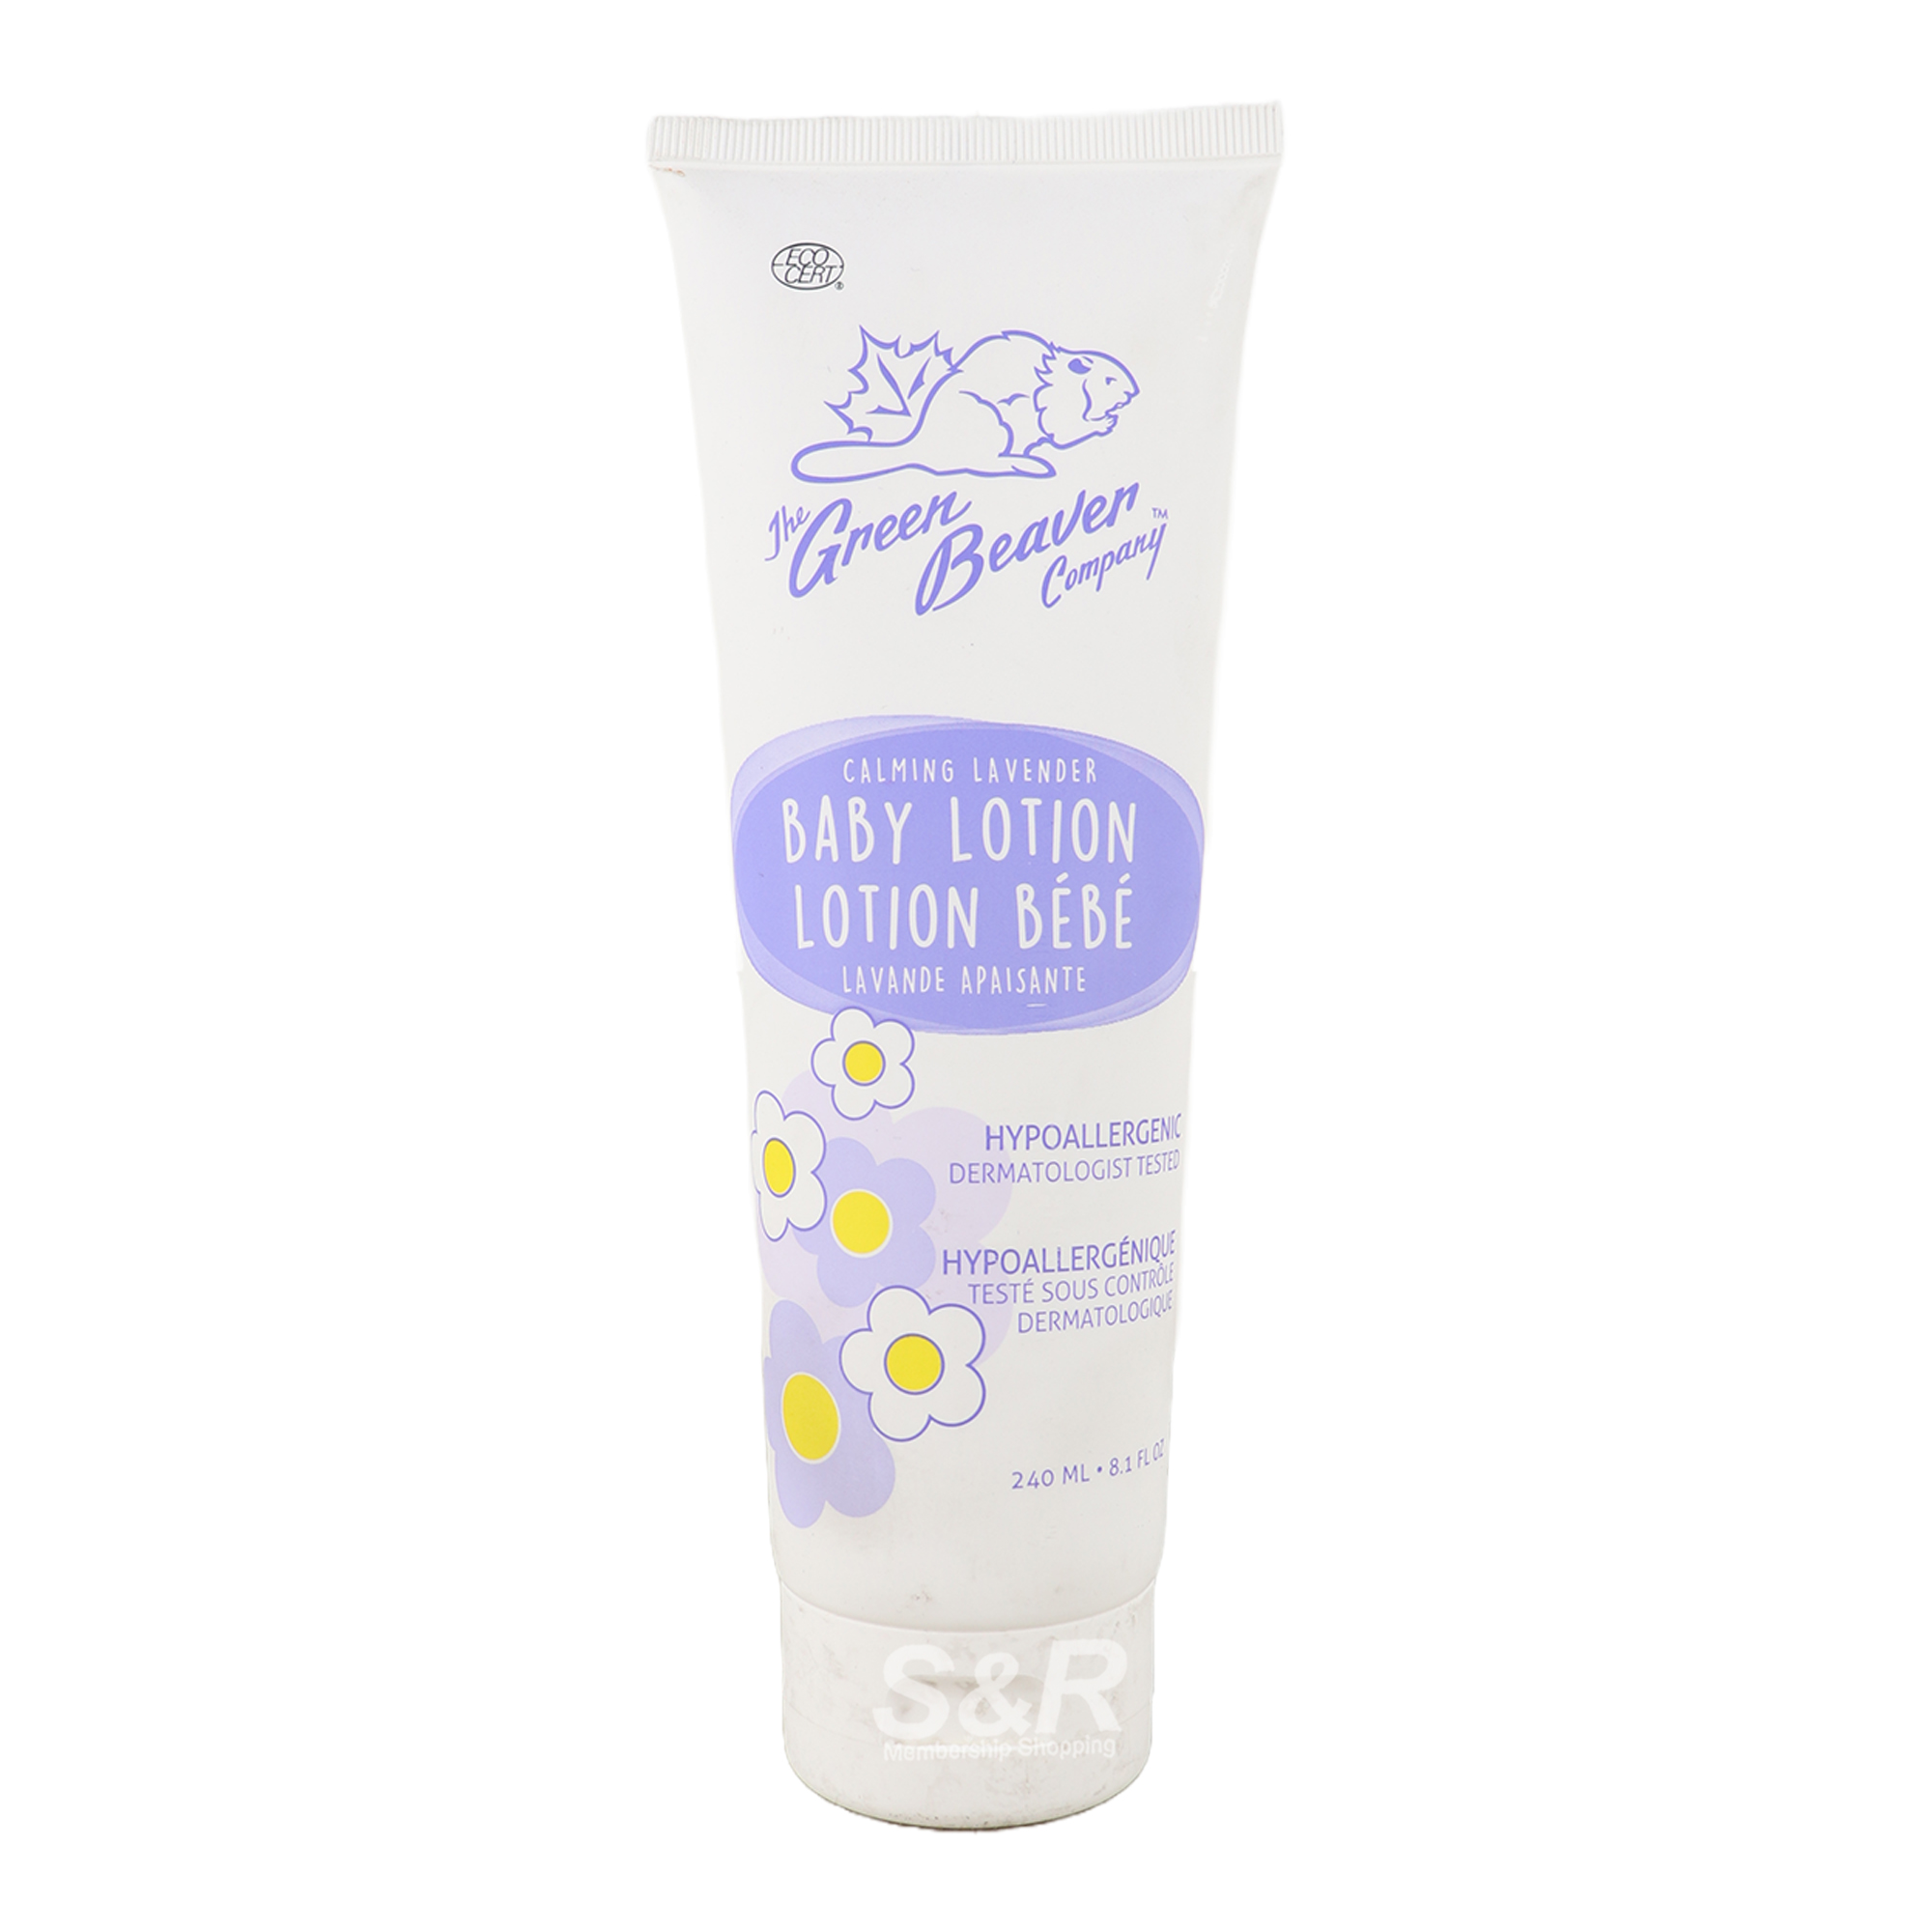 The Green Beaver Company Calming Lavender Baby Lotion 240mL